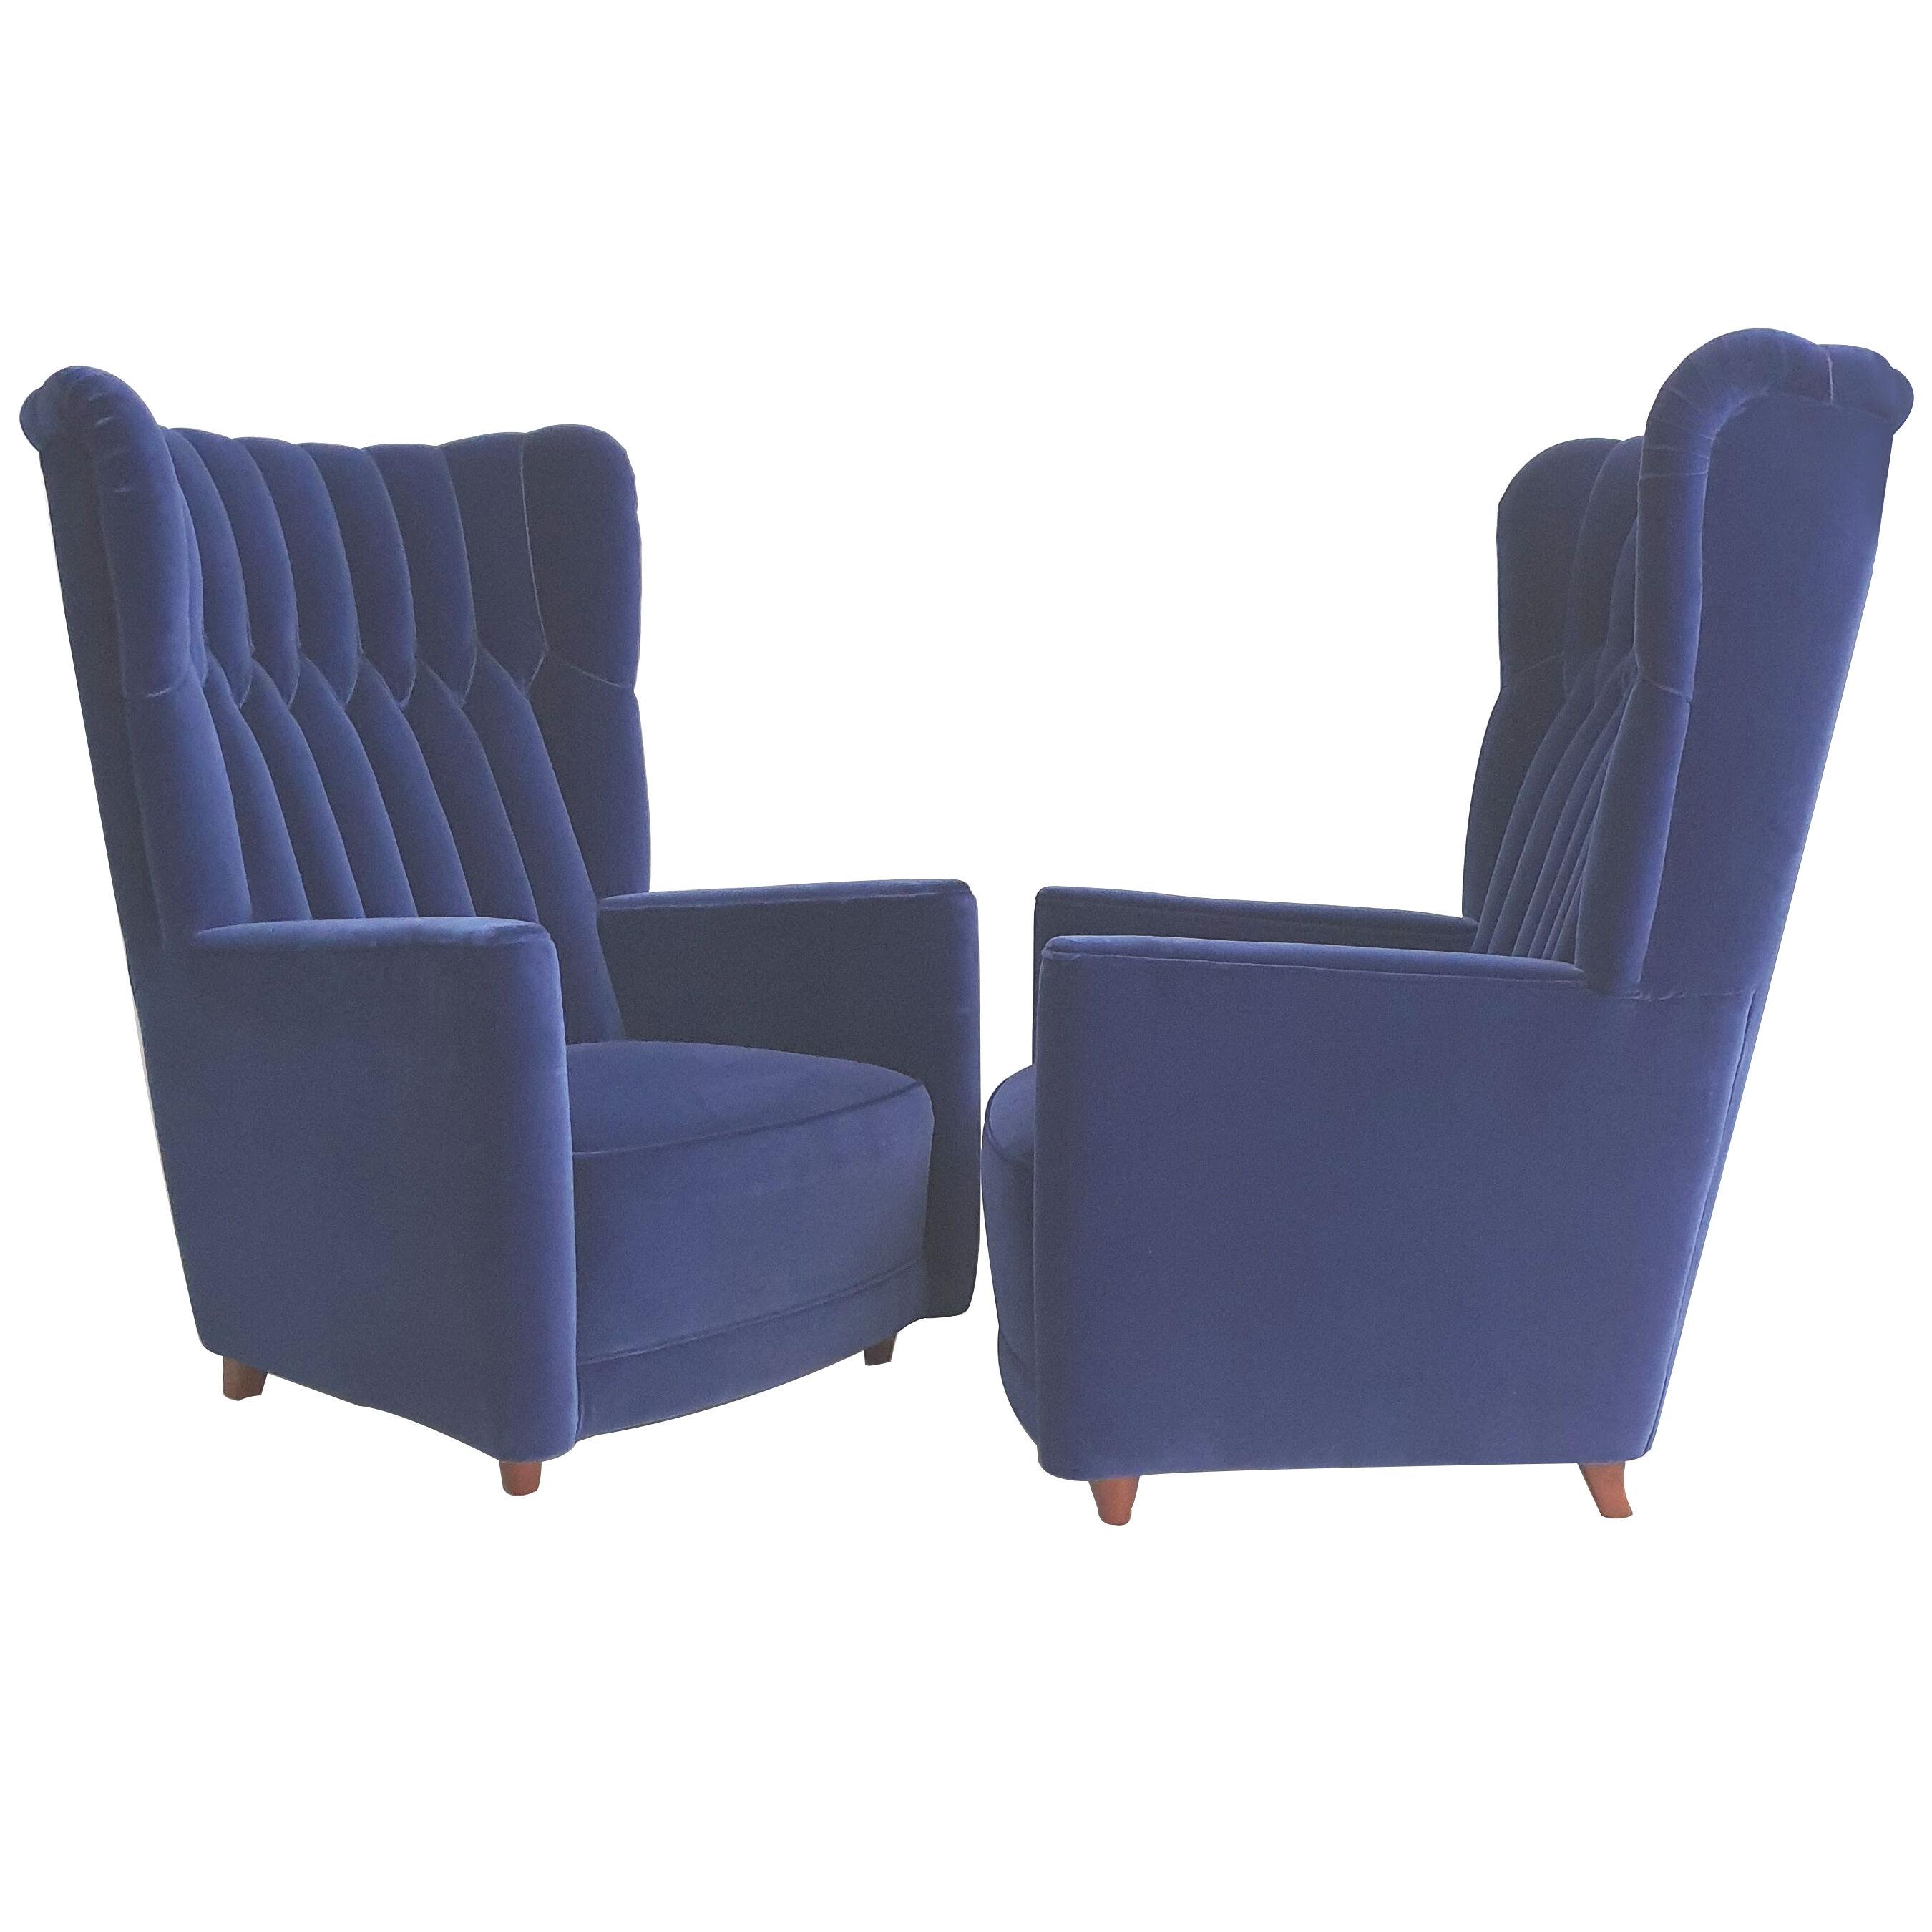 Pair of armchairs by Guglielmo Ulrich